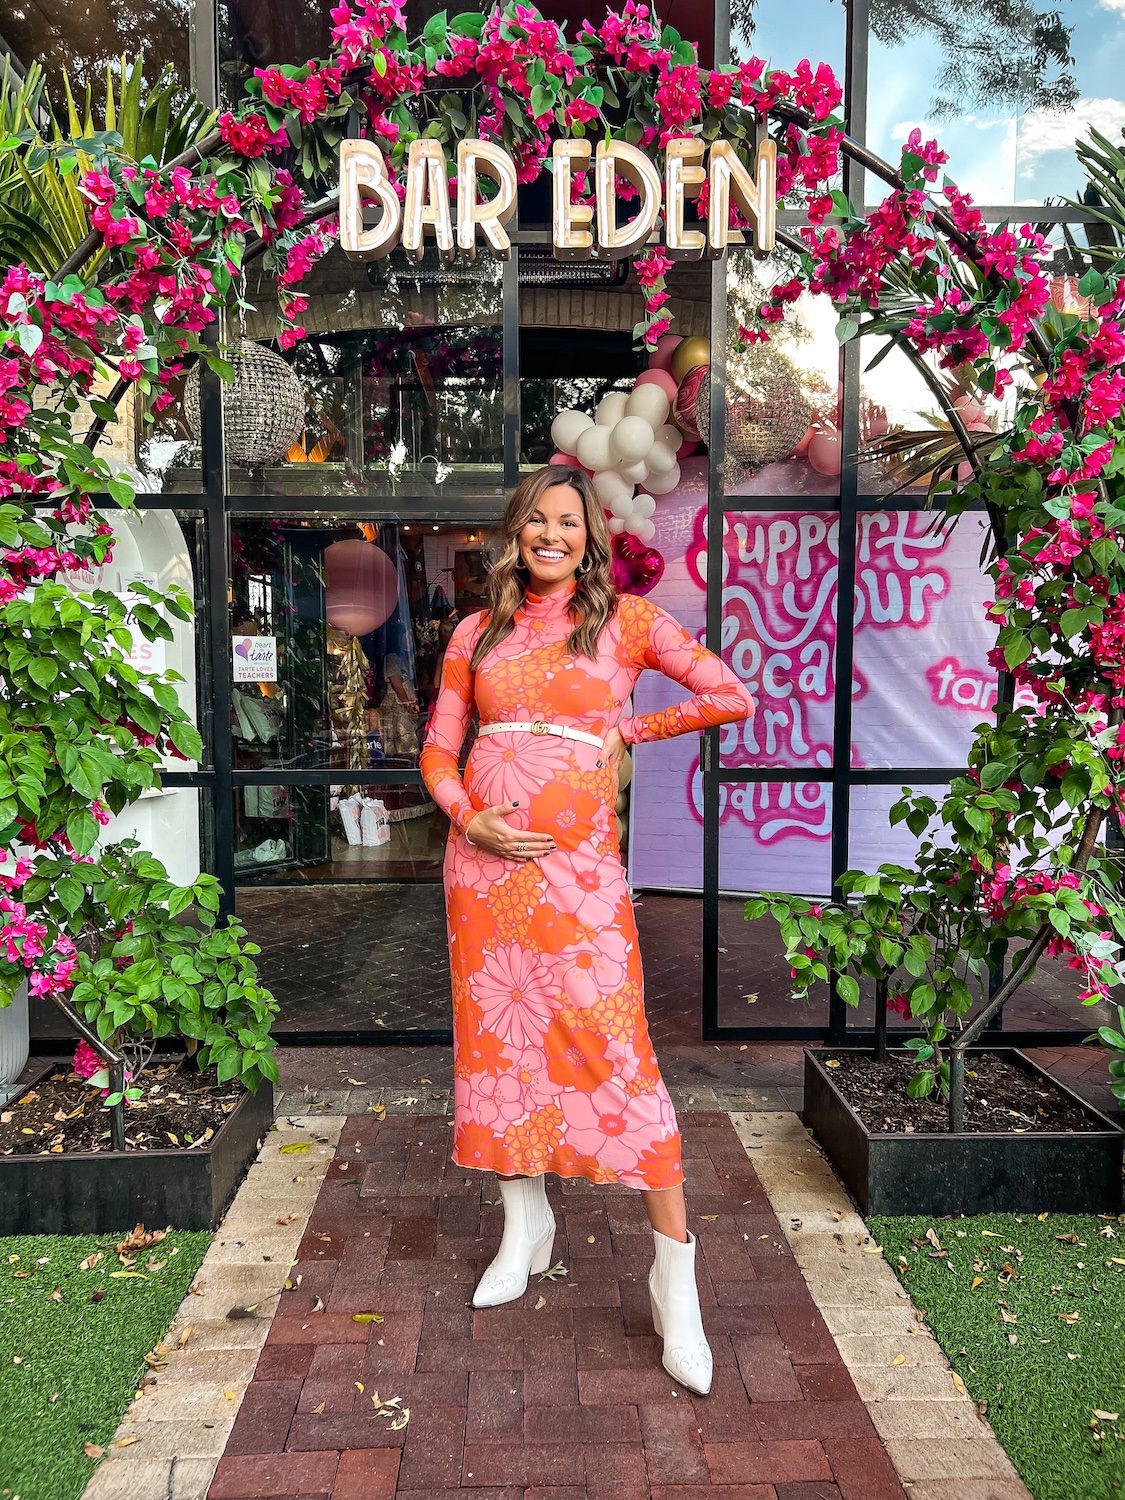 woman in floral dress holding baby belly in front of a sign that says bar eden